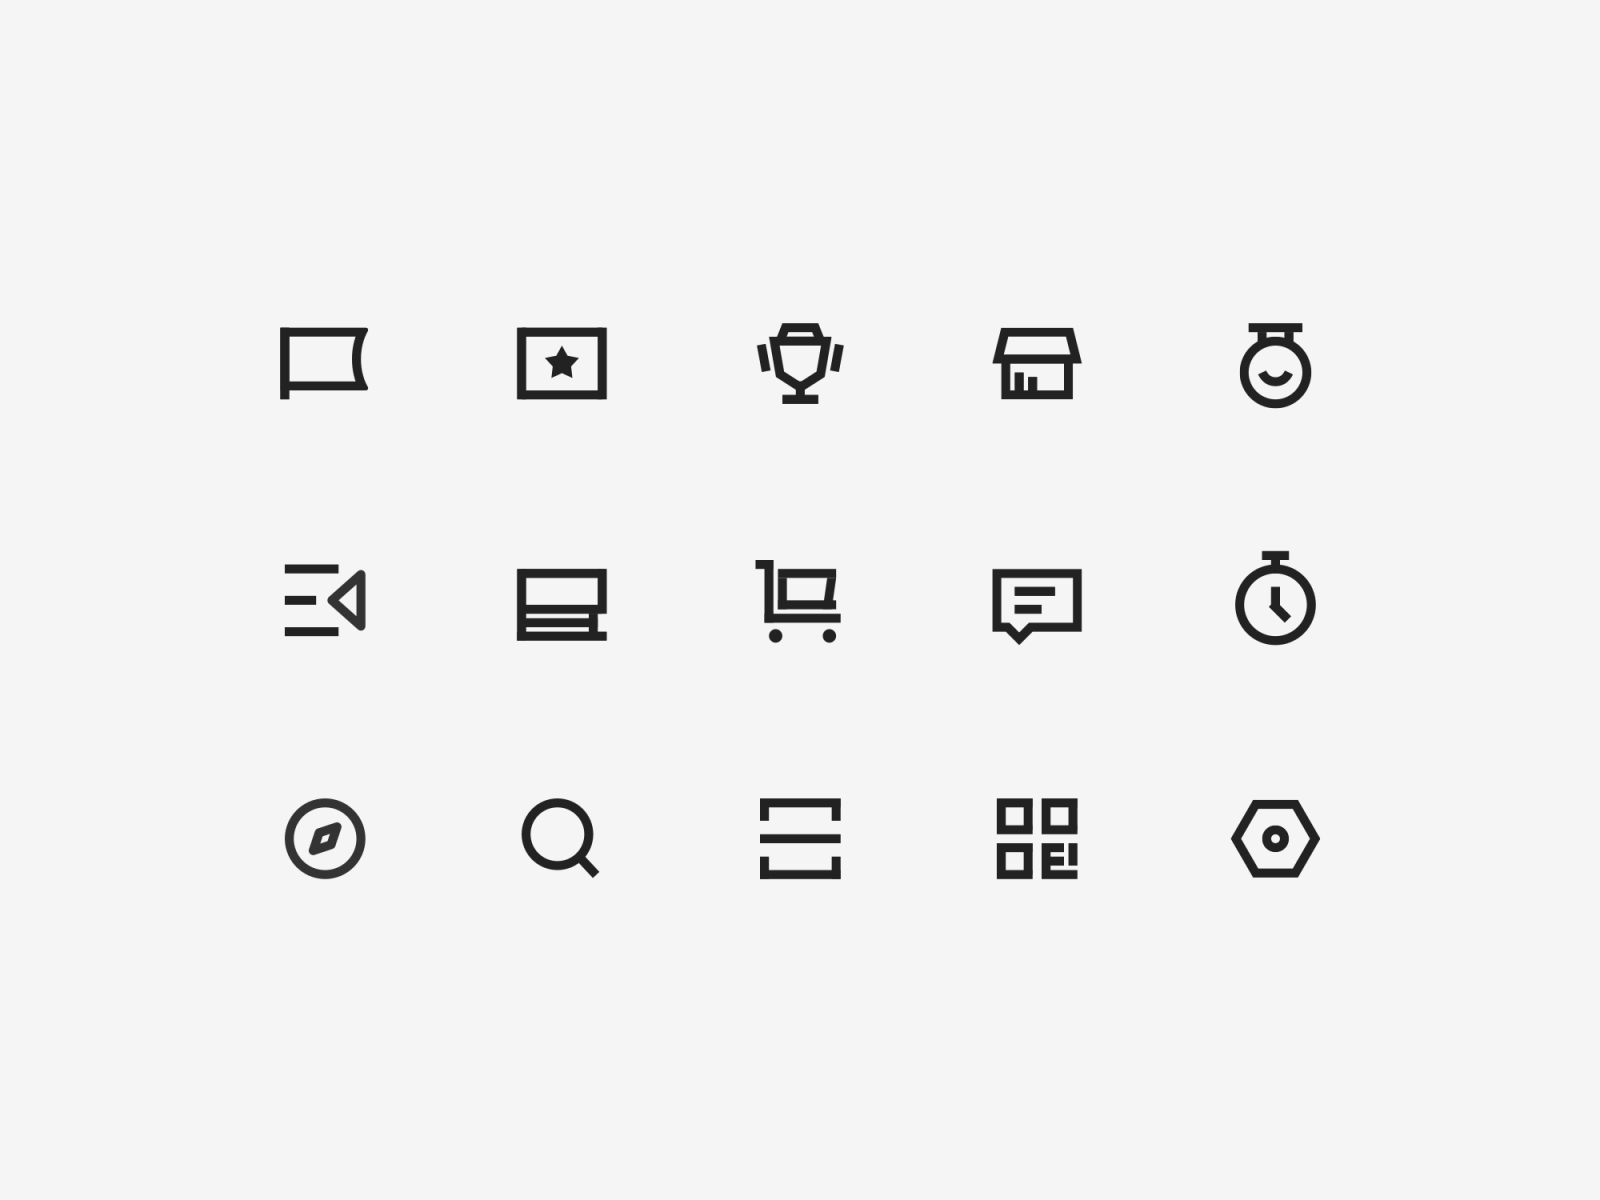 iCONS by Mrxccc on Dribbble